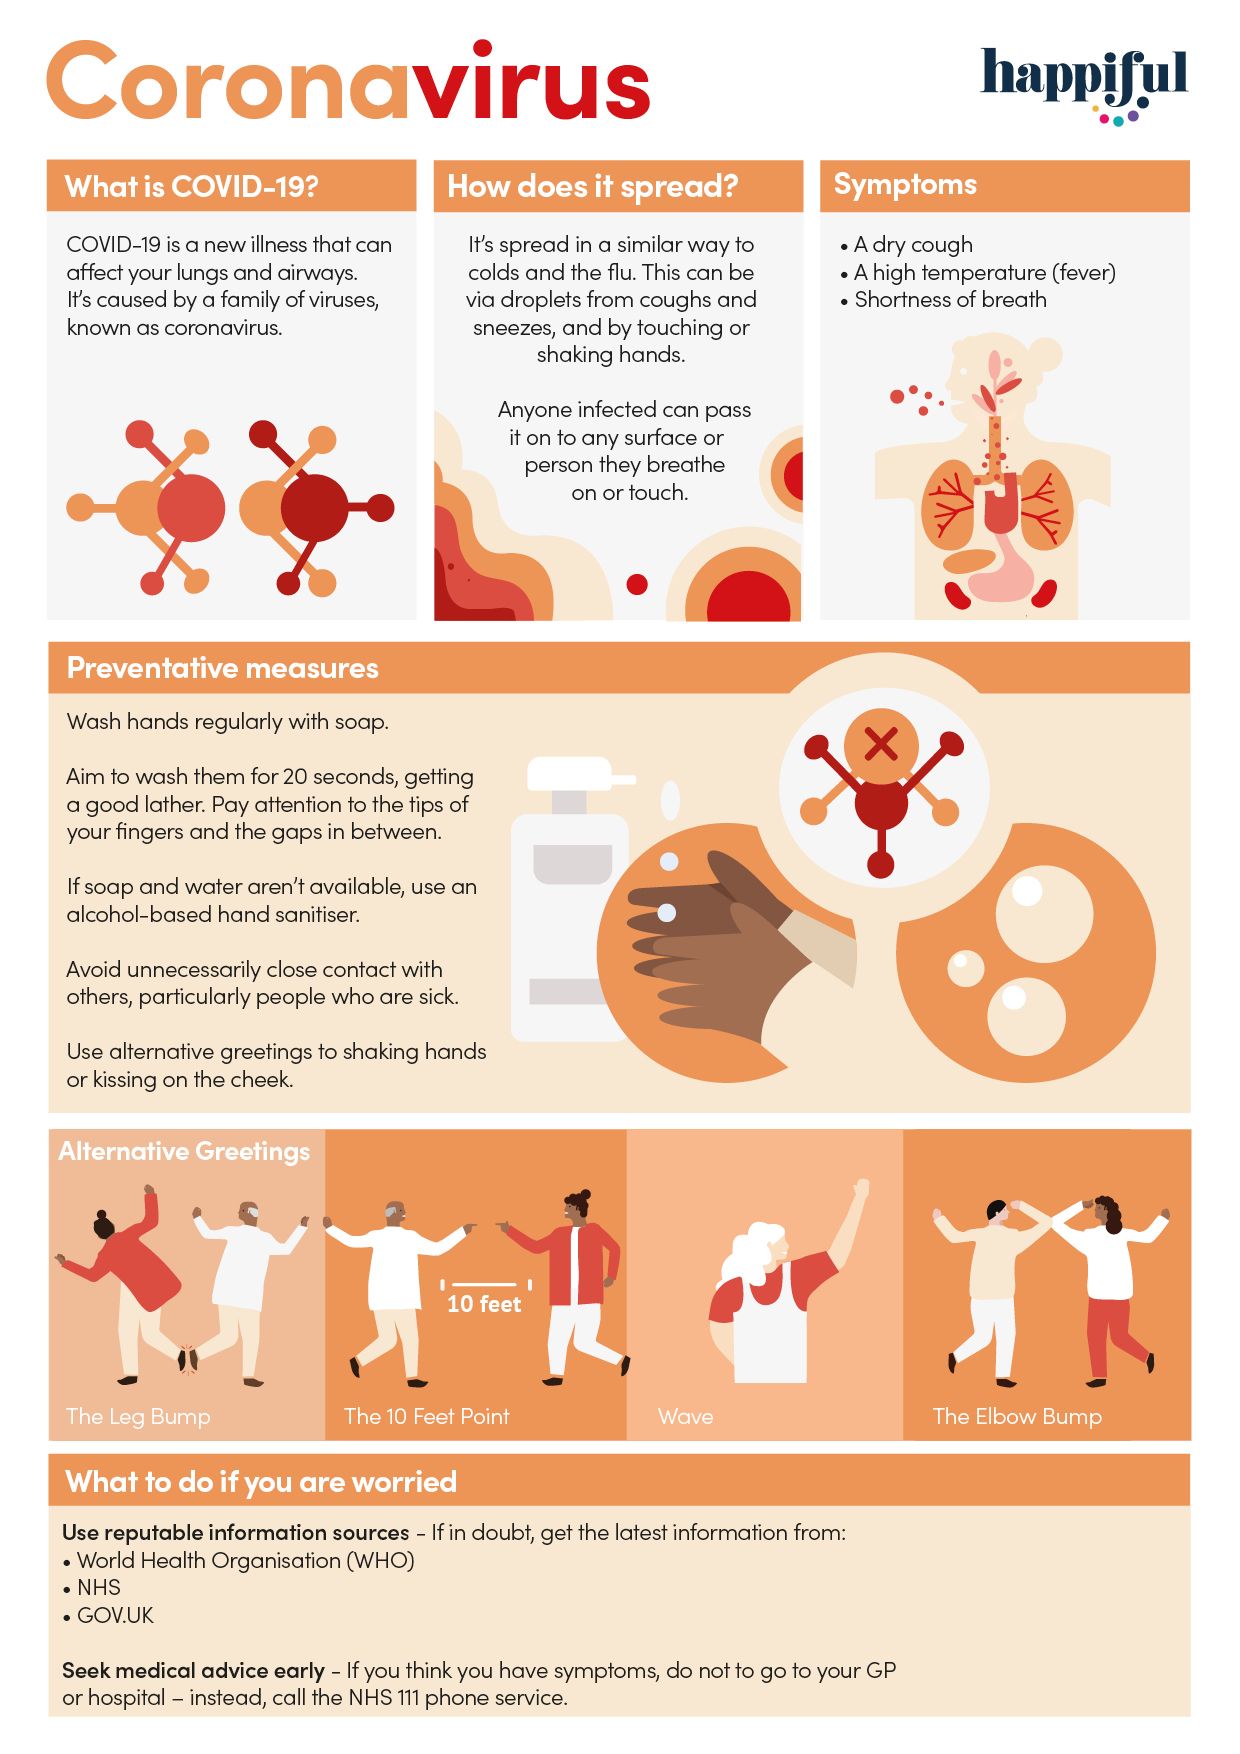 What is Coronavirus? Useful information about COVID-19, including symptoms, how it spreads, preventative measures, alternative greeting and what to do if you're worried.